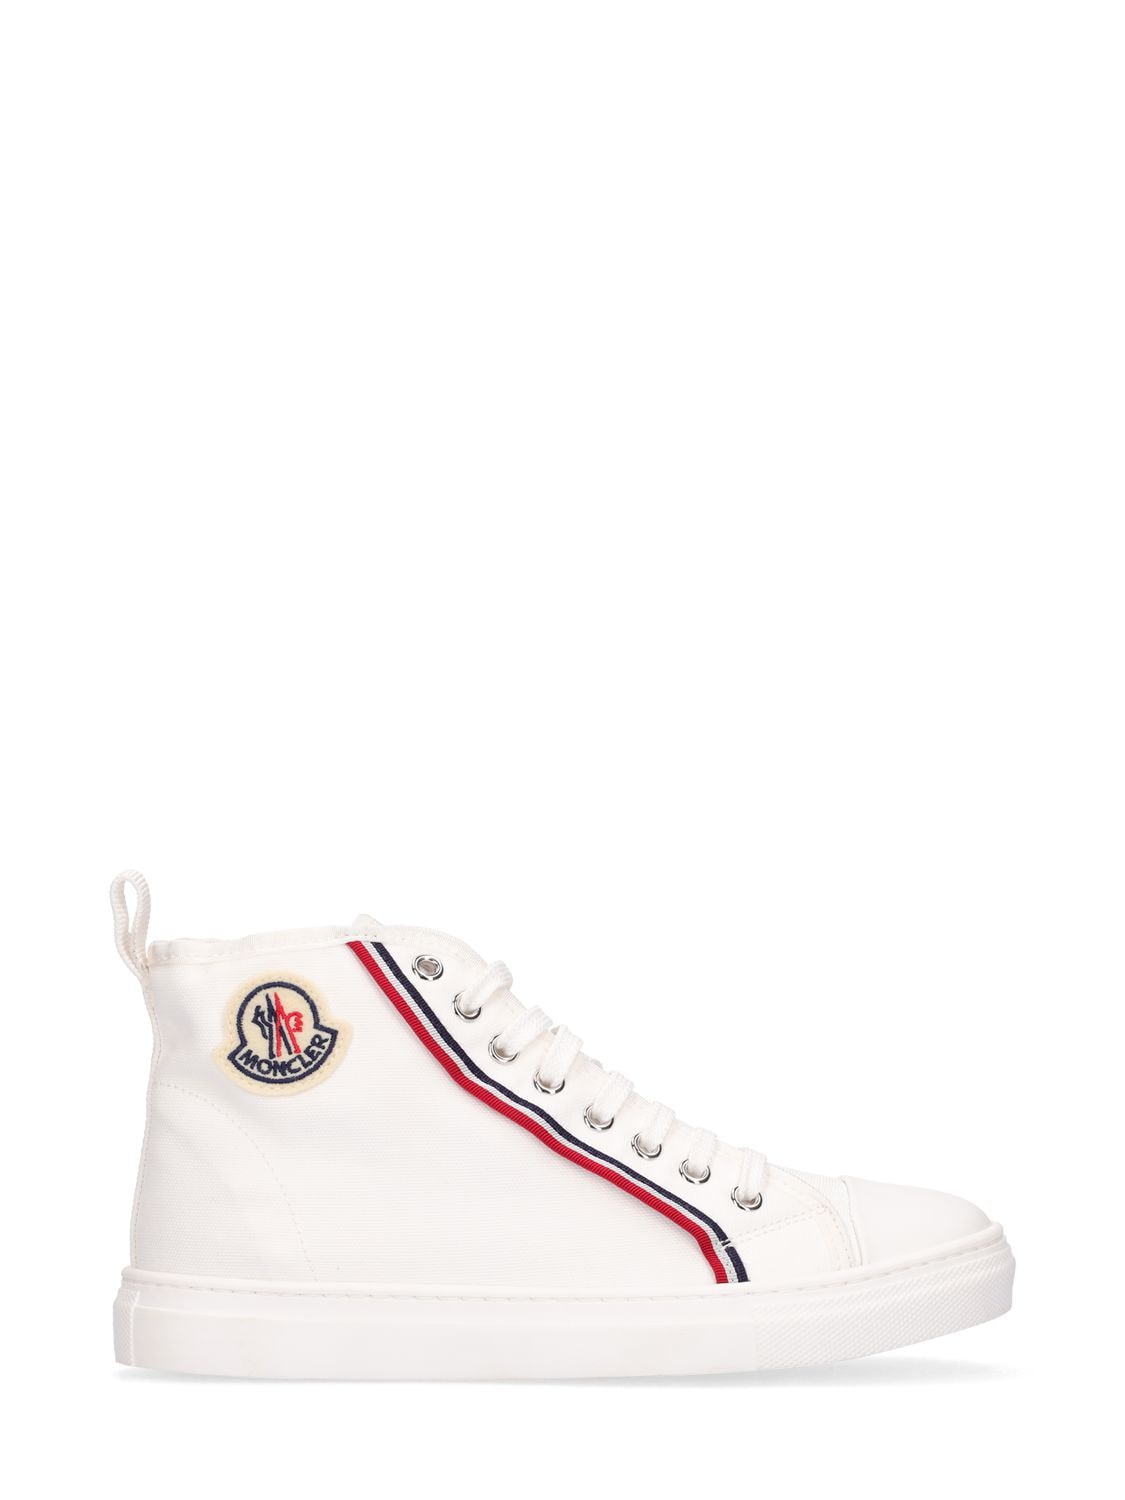 MONCLER Shoes for Kids | ModeSens